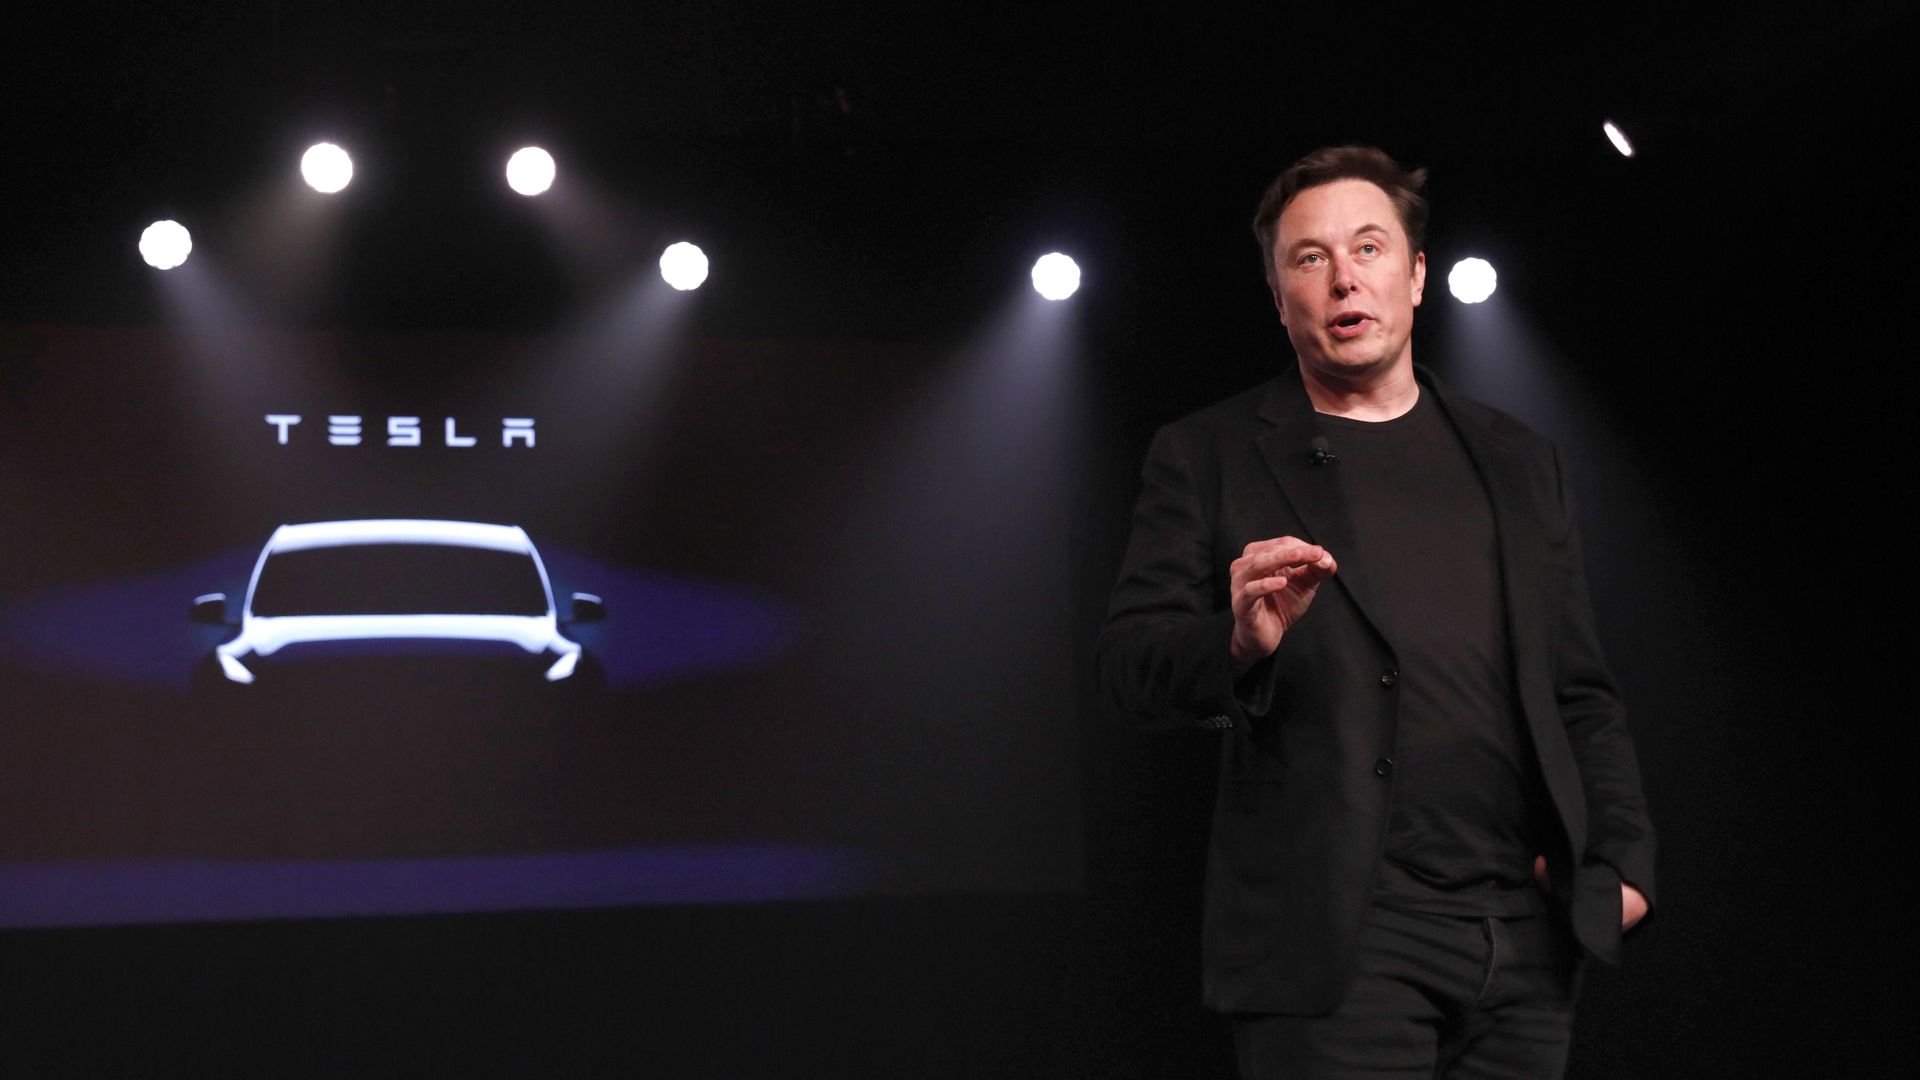 Elon Musk, co-founder of Tesla Inc., speaks during an unveiling event for the Tesla Model Y crossover electric vehicle in Hawthorne, California, U.S., on Friday, March 15, 2019.